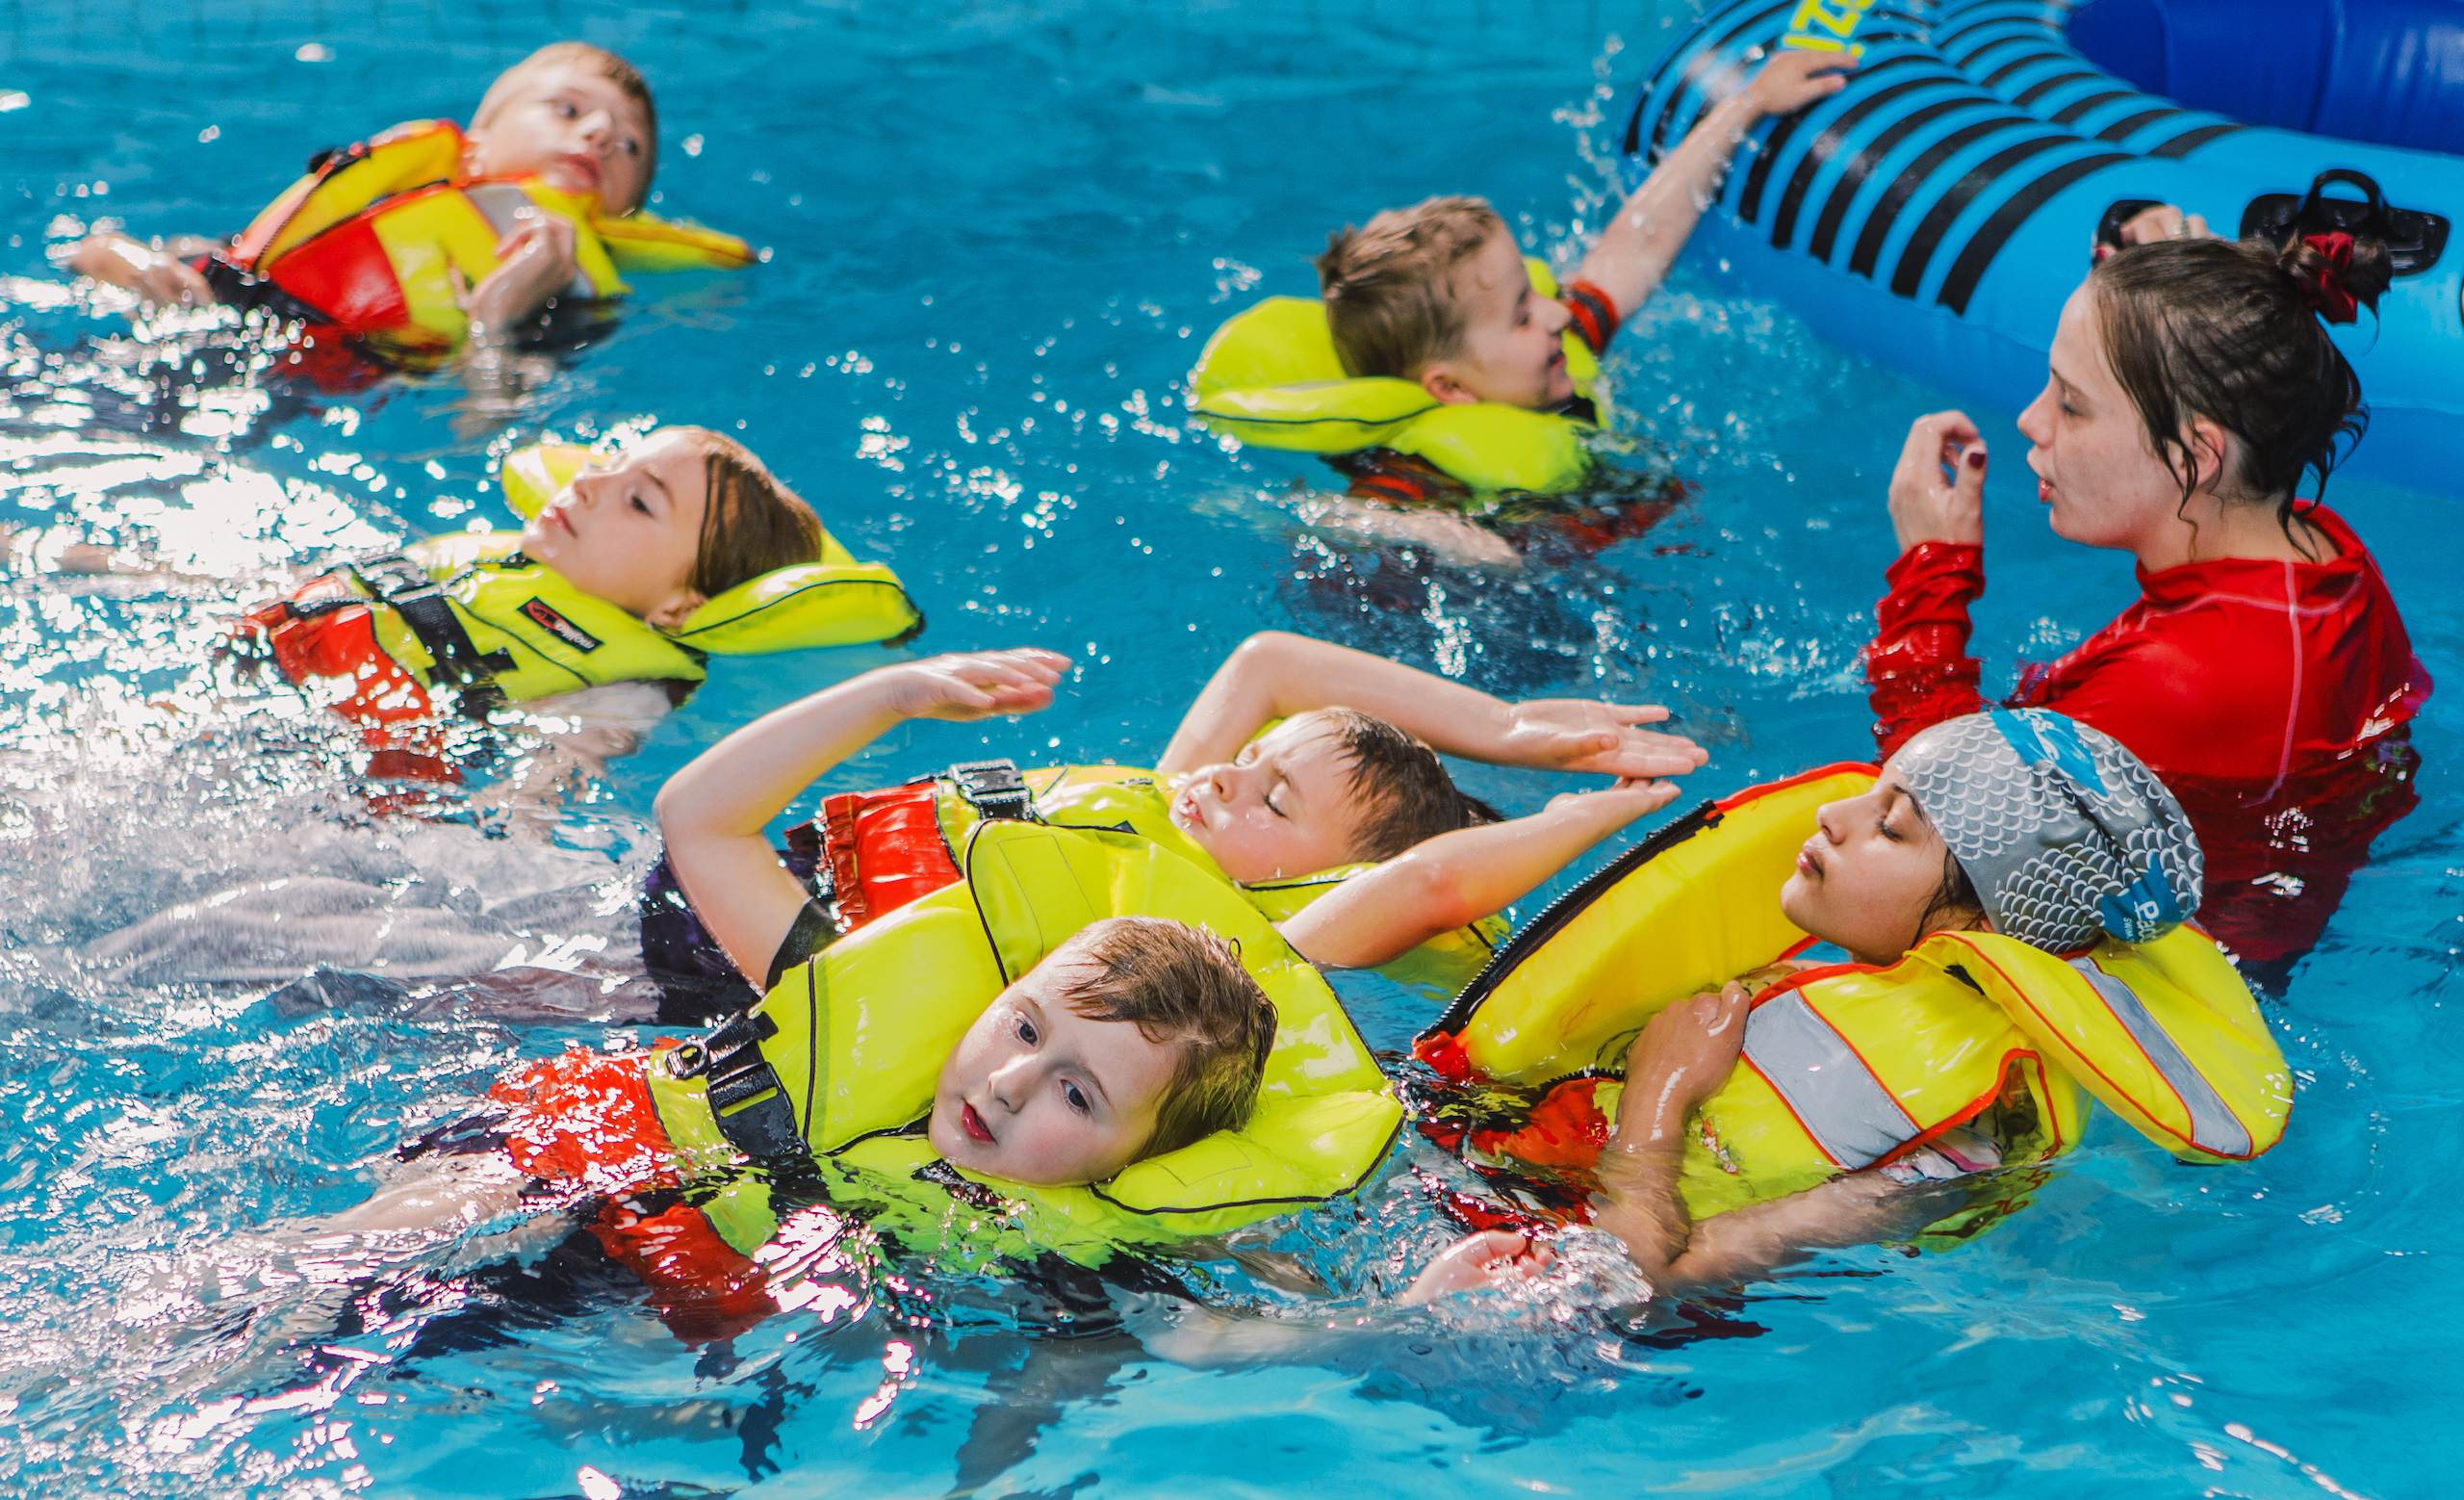 Paddles Swim School Event - Simulated open water activities